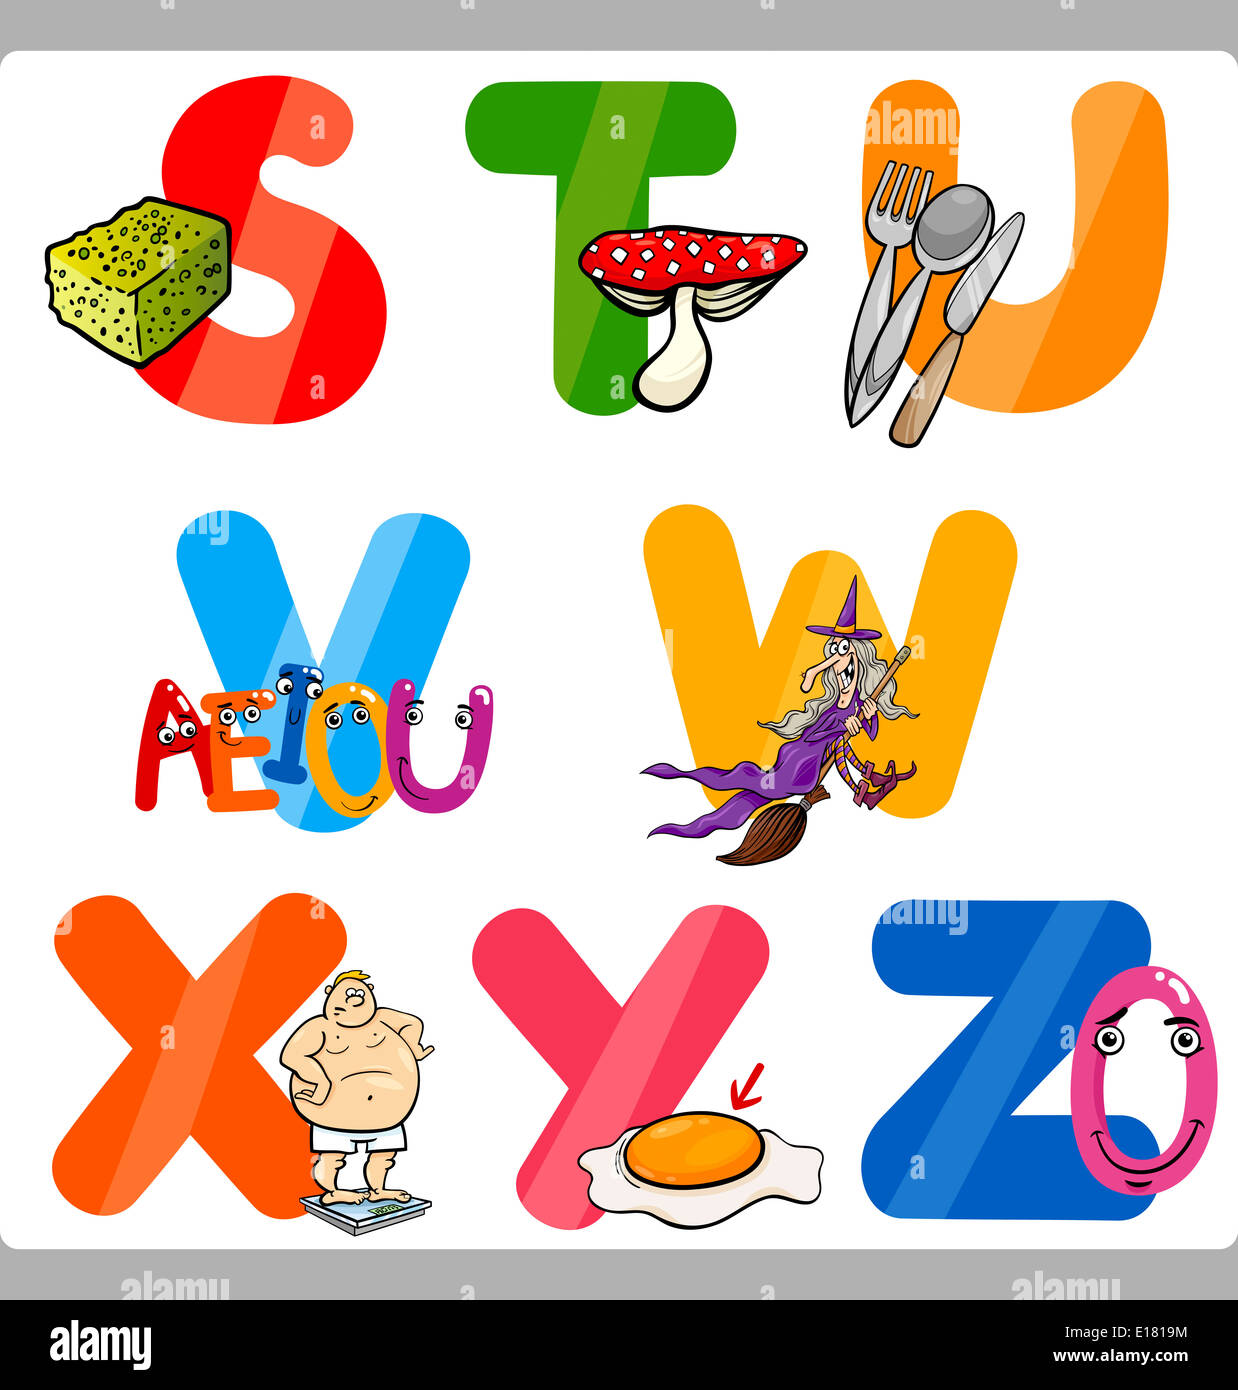 Cartoon Illustration of Funny Capital Letters Alphabet with Objects for Reading and Writing Education for Children from S to Z Stock Photo